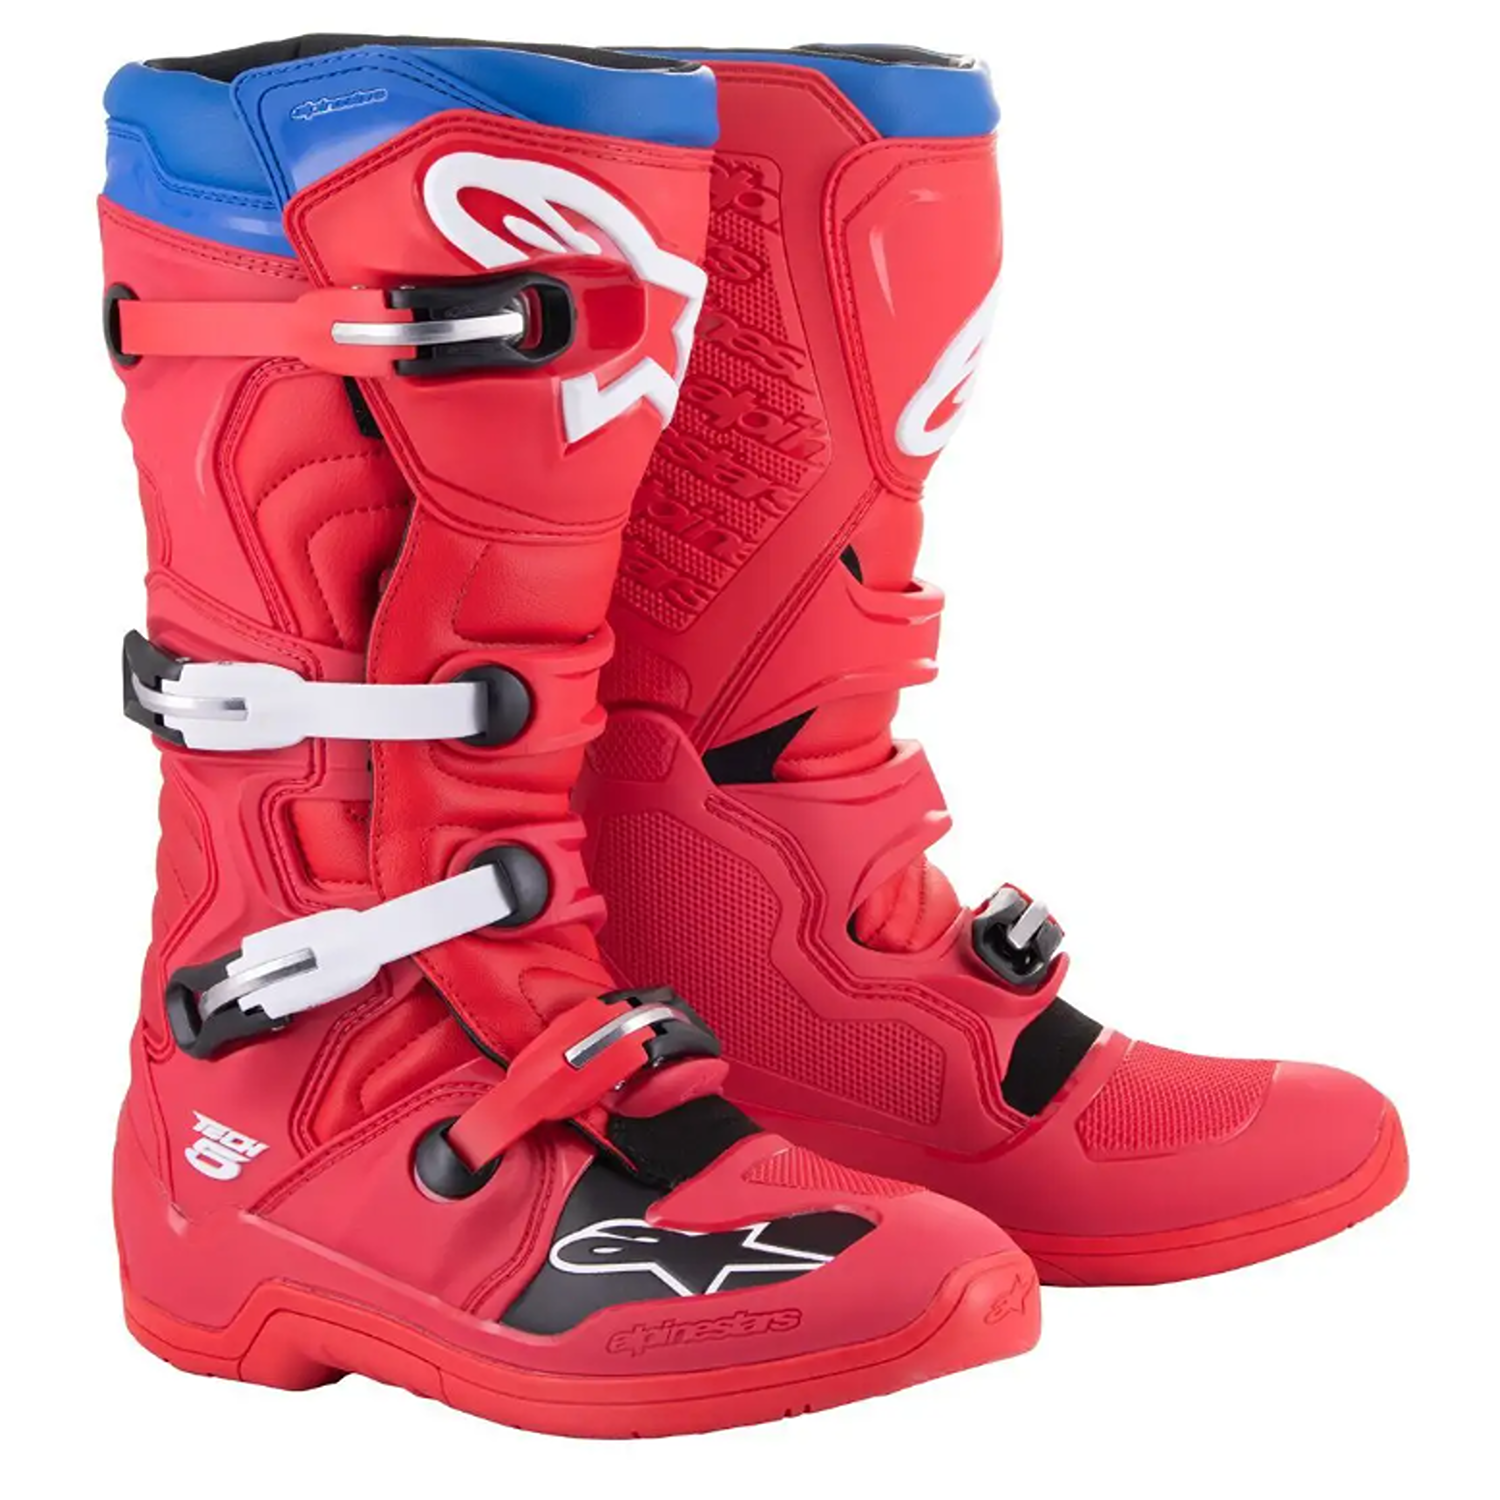 Image of Alpinestars Tech 5 Boots Bright Red Dark Red Blue Size US 11 ID 8059347199368